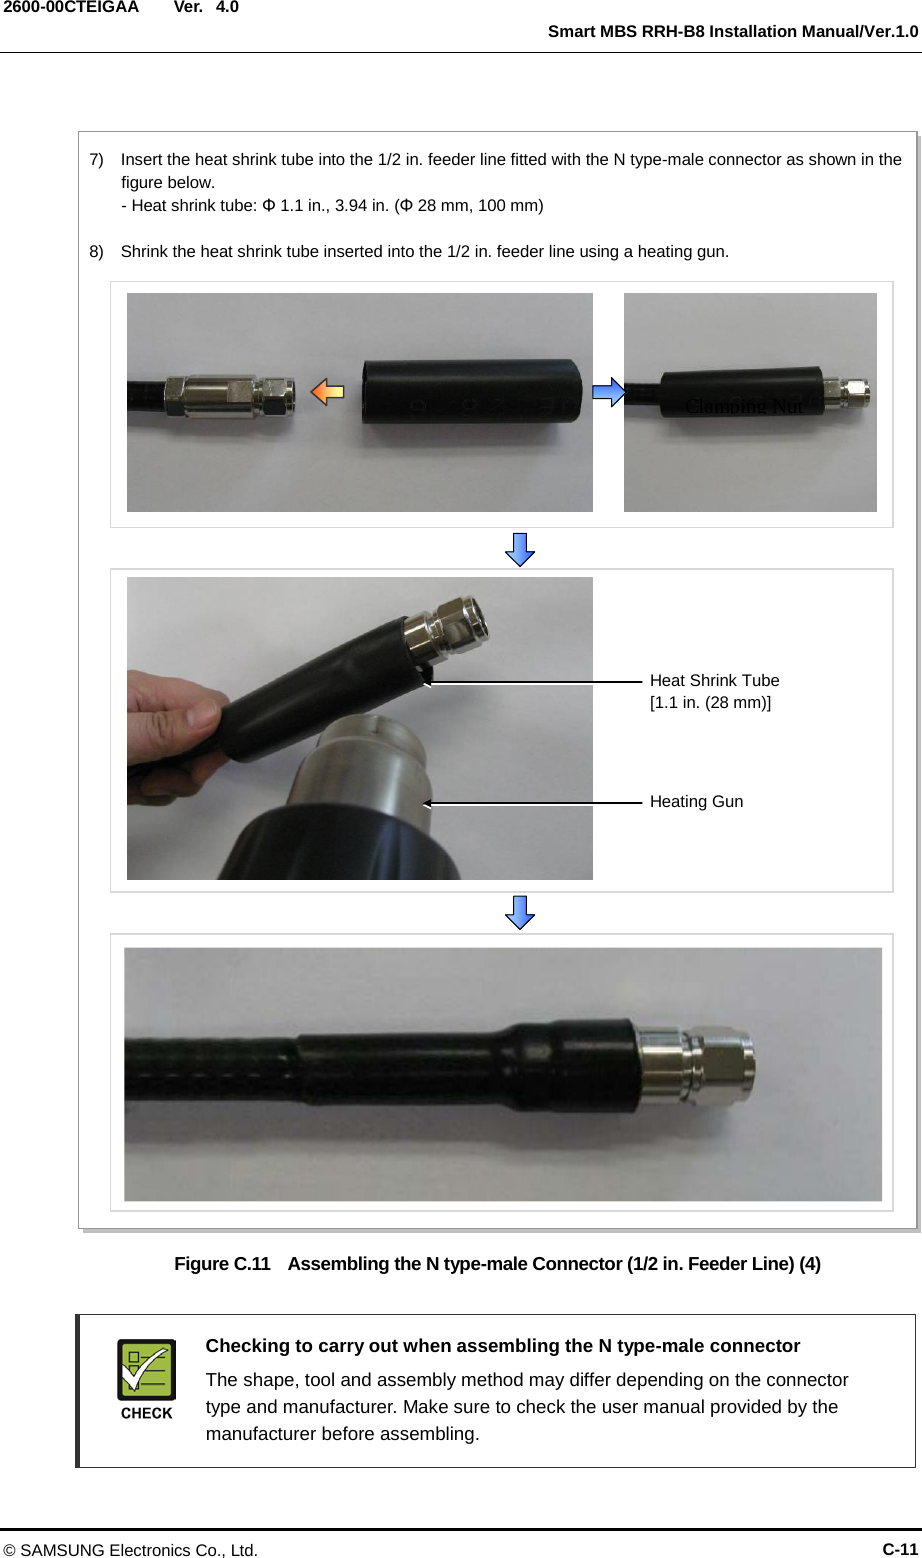  Ver.   Smart MBS RRH-B8 Installation Manual/Ver.1.0 2600-00CTEIGAA 4.0  Figure C.11  Assembling the N type-male Connector (1/2 in. Feeder Line) (4)   Checking to carry out when assembling the N type-male connector  The shape, tool and assembly method may differ depending on the connector type and manufacturer. Make sure to check the user manual provided by the manufacturer before assembling. Clamping Nut 7)  Insert the heat shrink tube into the 1/2 in. feeder line fitted with the N type-male connector as shown in the figure below. - Heat shrink tube: Φ 1.1 in., 3.94 in. (Φ 28 mm, 100 mm)  8)  Shrink the heat shrink tube inserted into the 1/2 in. feeder line using a heating gun. Heating Gun Heat Shrink Tube   [1.1 in. (28 mm)] © SAMSUNG Electronics Co., Ltd. C-11 